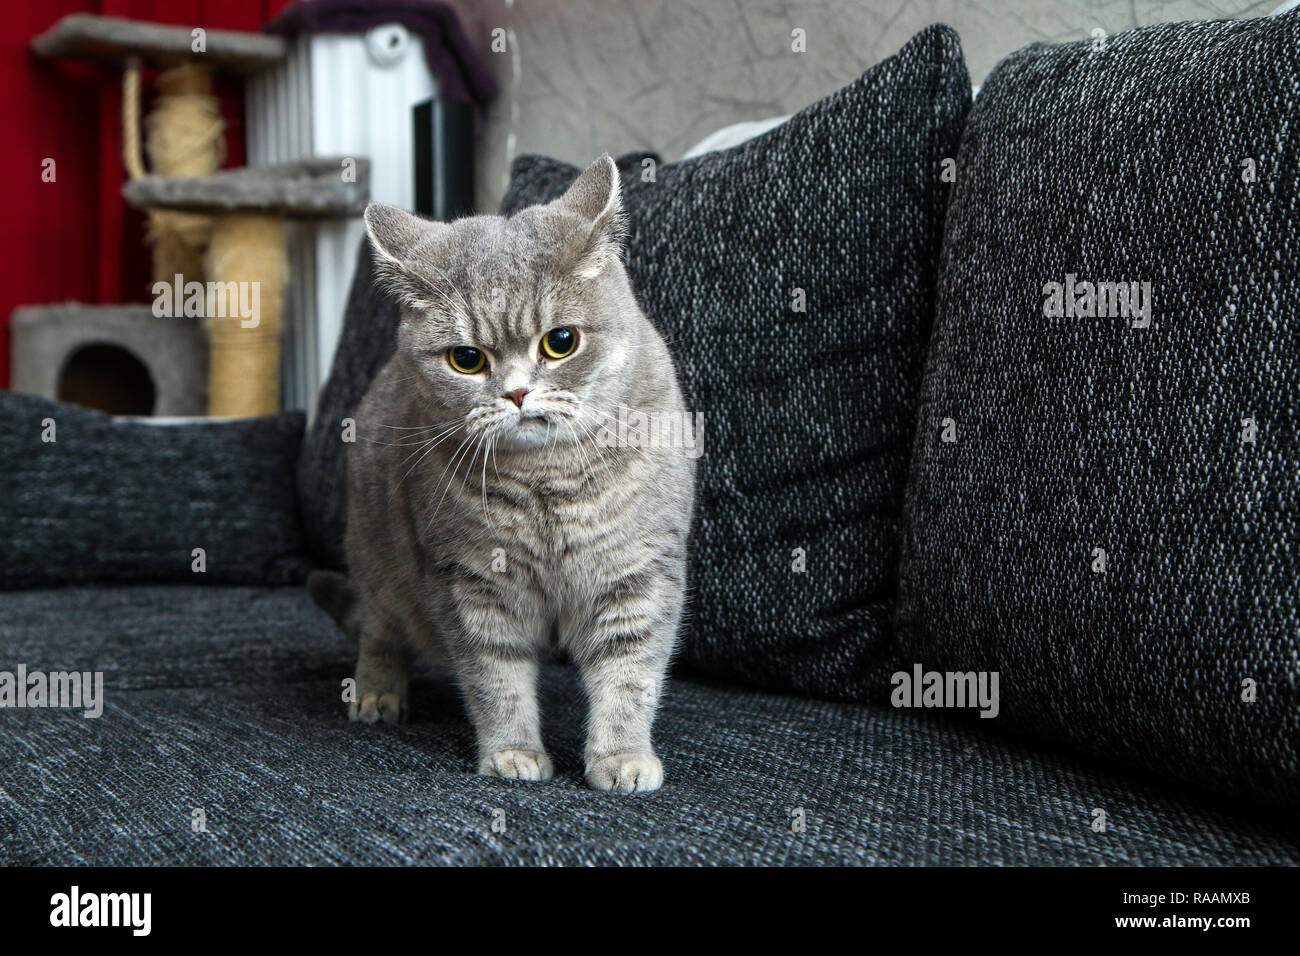 The cute british cat on the sofa, looking a bit sceptical and nervous, as it has crooked mouth. Stock Photo